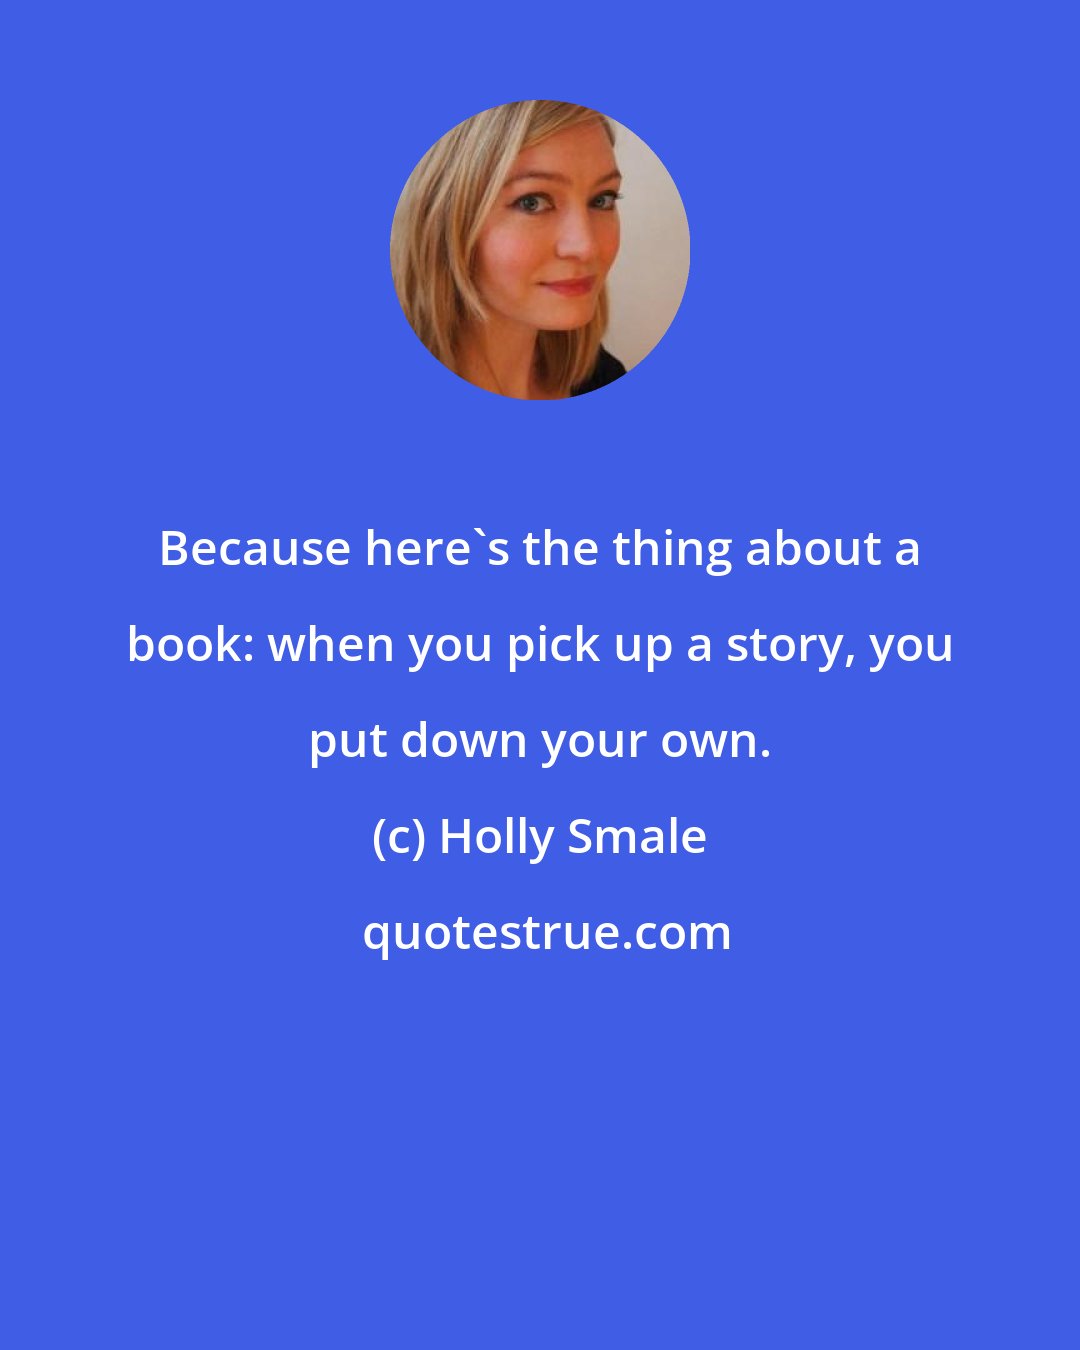 Holly Smale: Because here's the thing about a book: when you pick up a story, you put down your own.